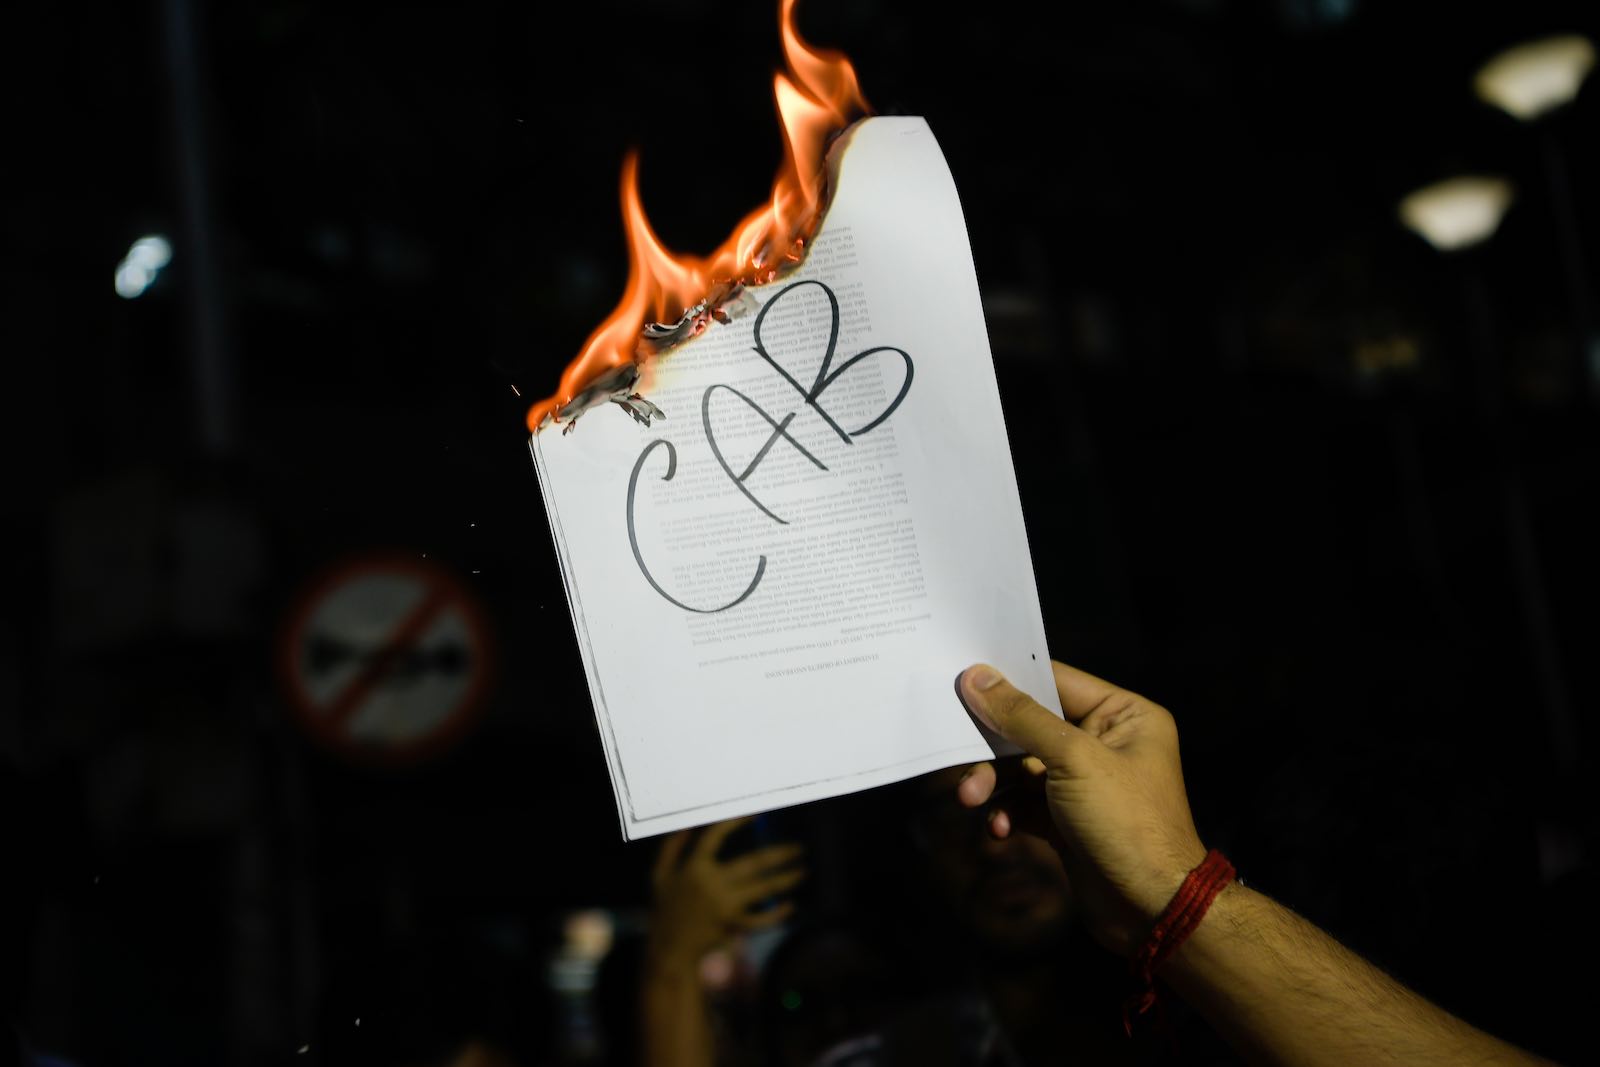 A replica of the citizenship bill is burnt during a weekend demonstration in Kolkata (Photo: Avijit Ghosh via Getty)